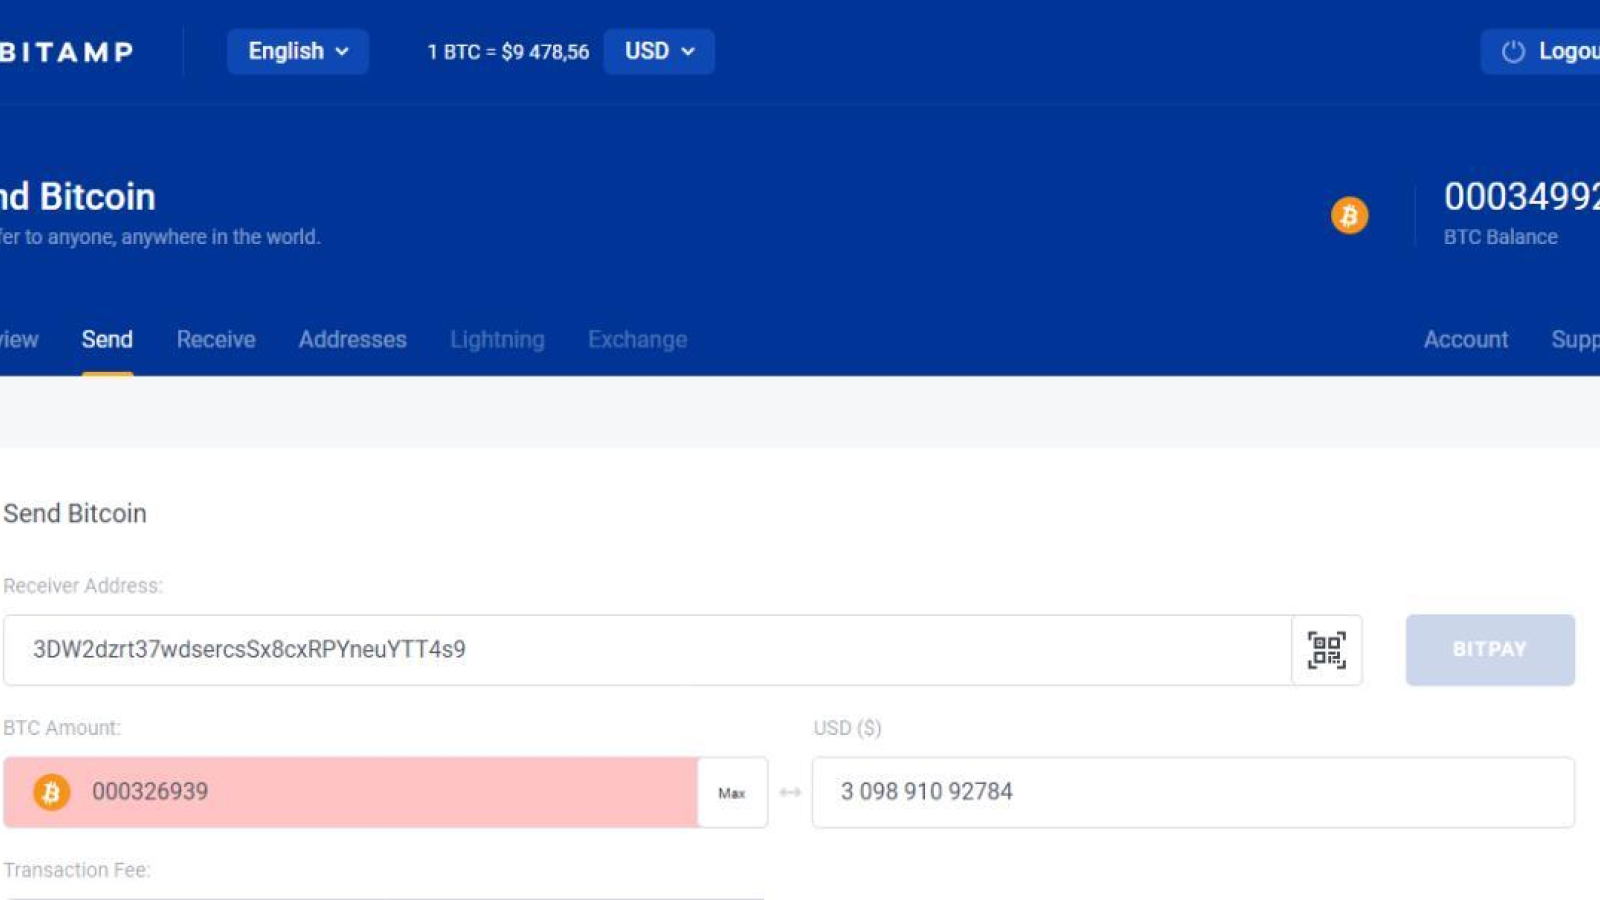 Bitamp wallet is ready to send the transaction